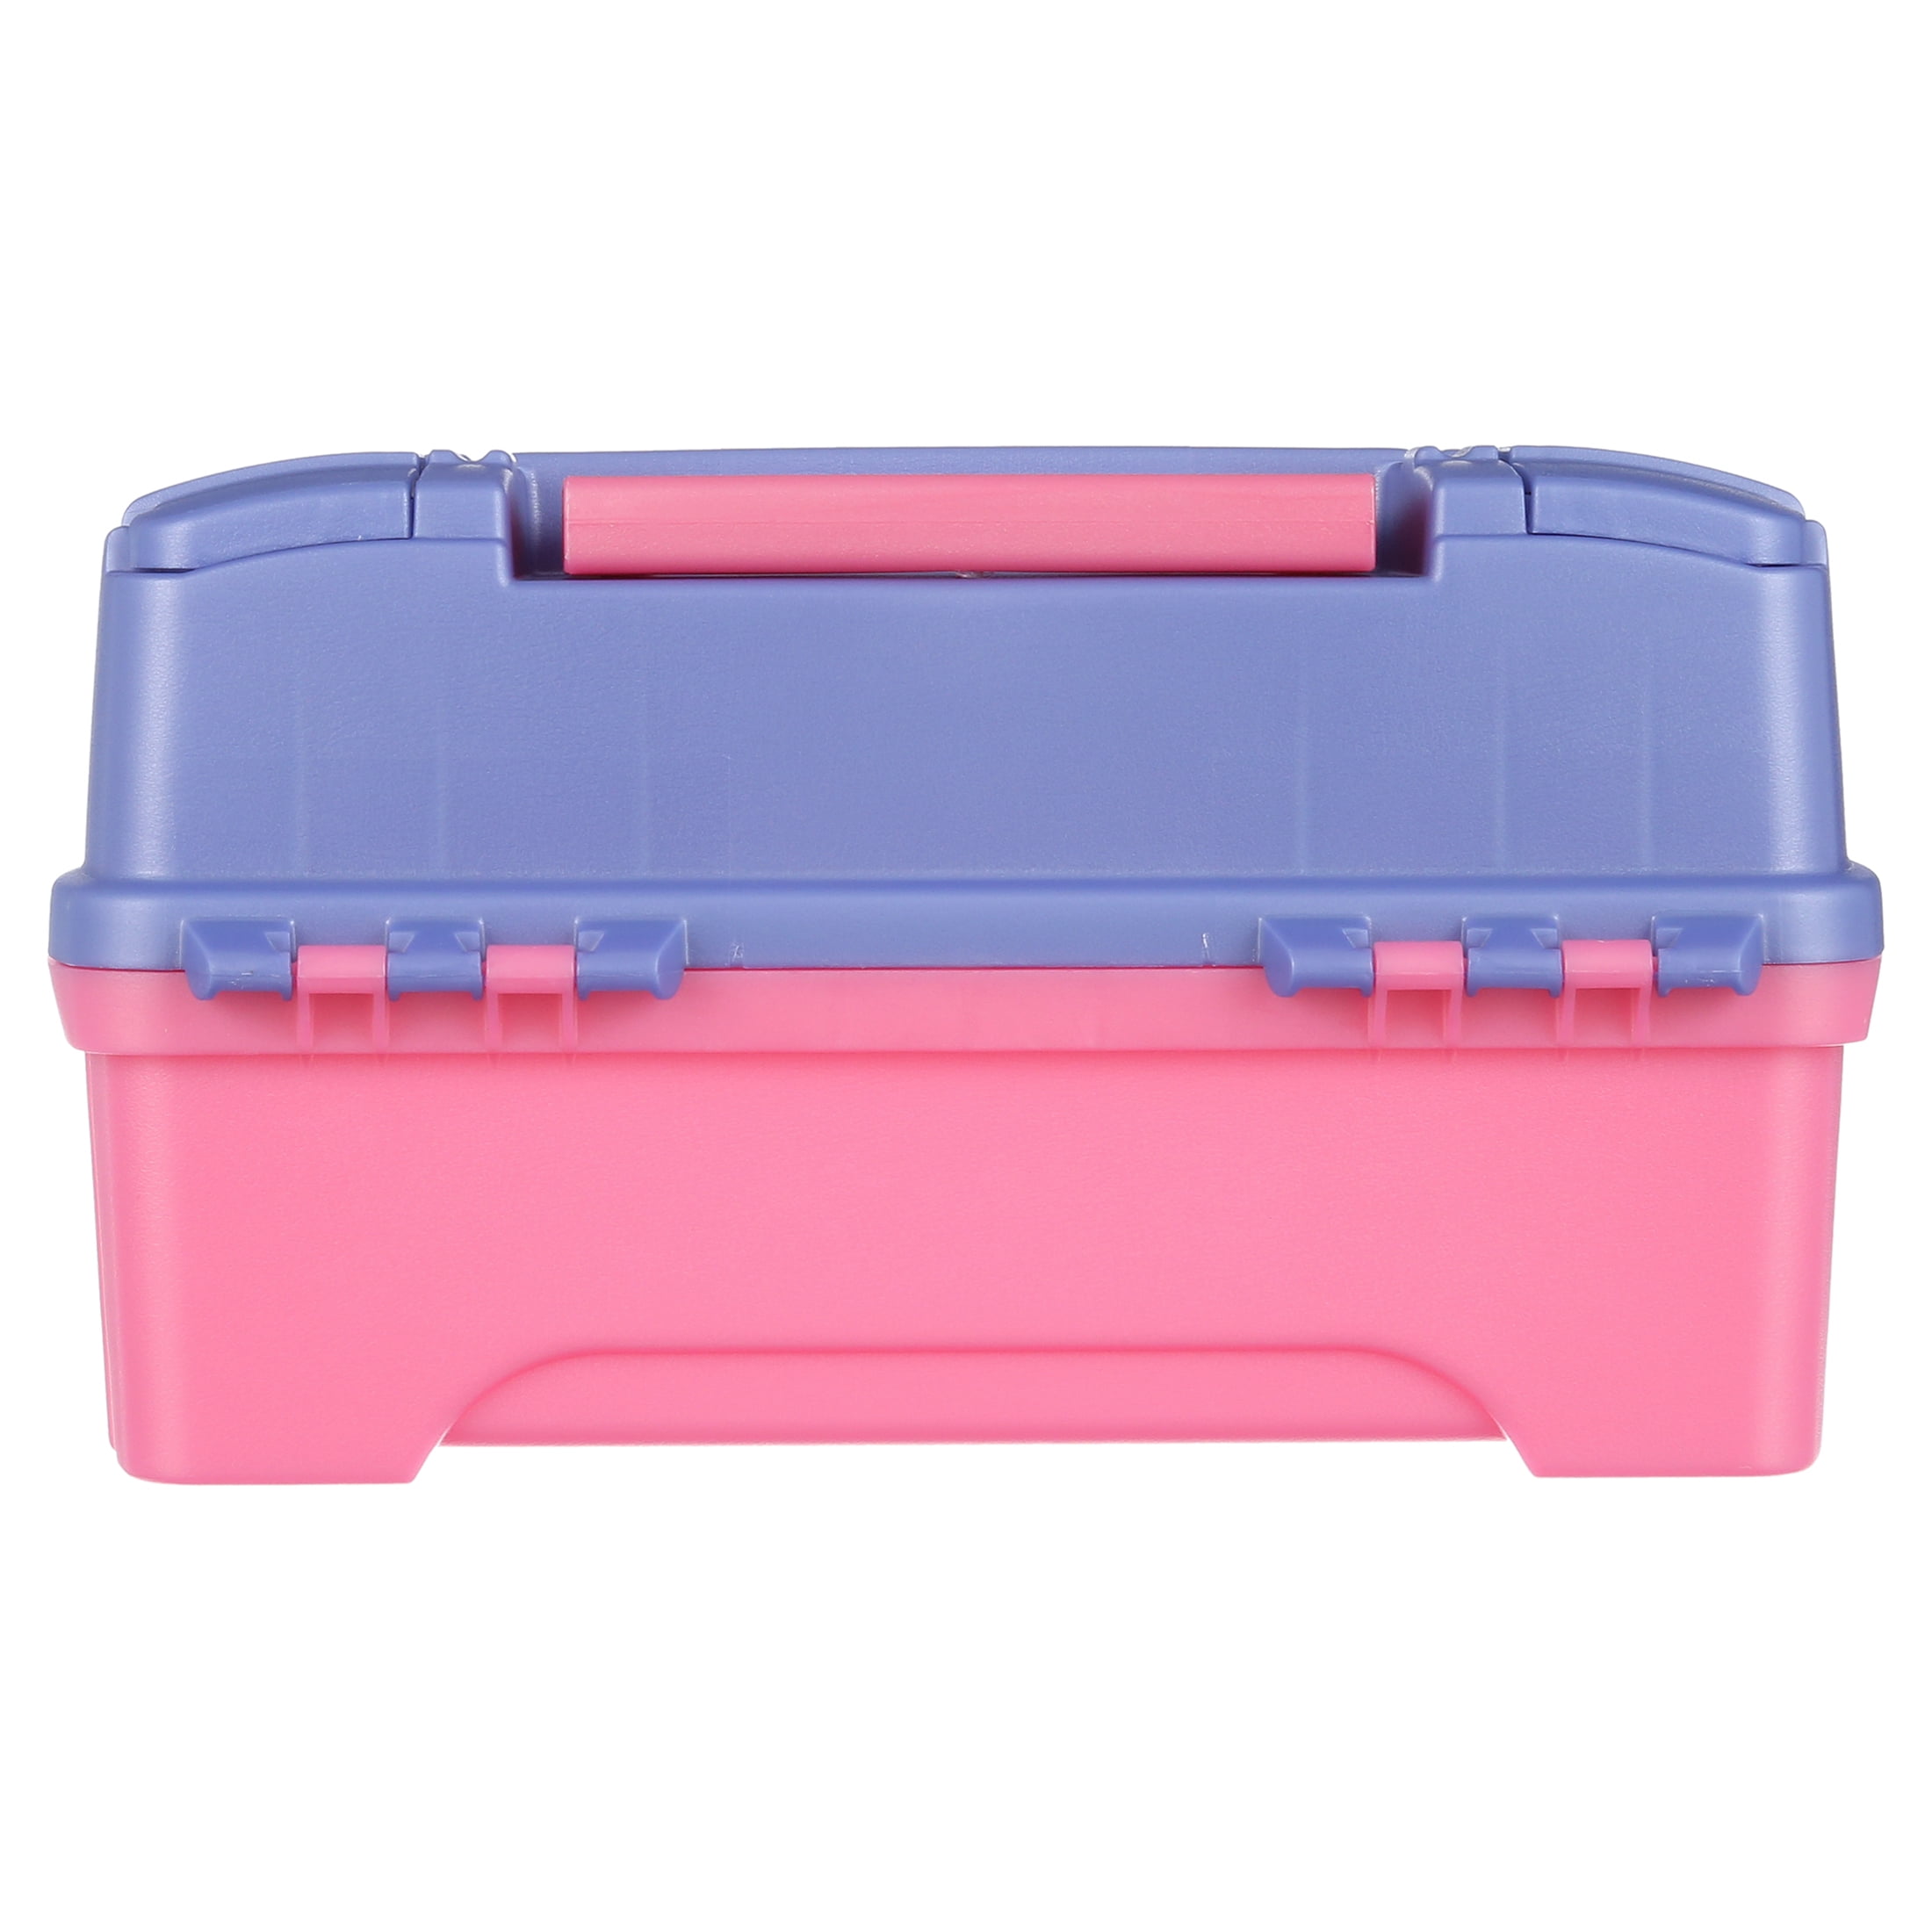 Plano Two Tray Fishing Tackle Box - Model: 6202-92 - Pink/Periwinkle 